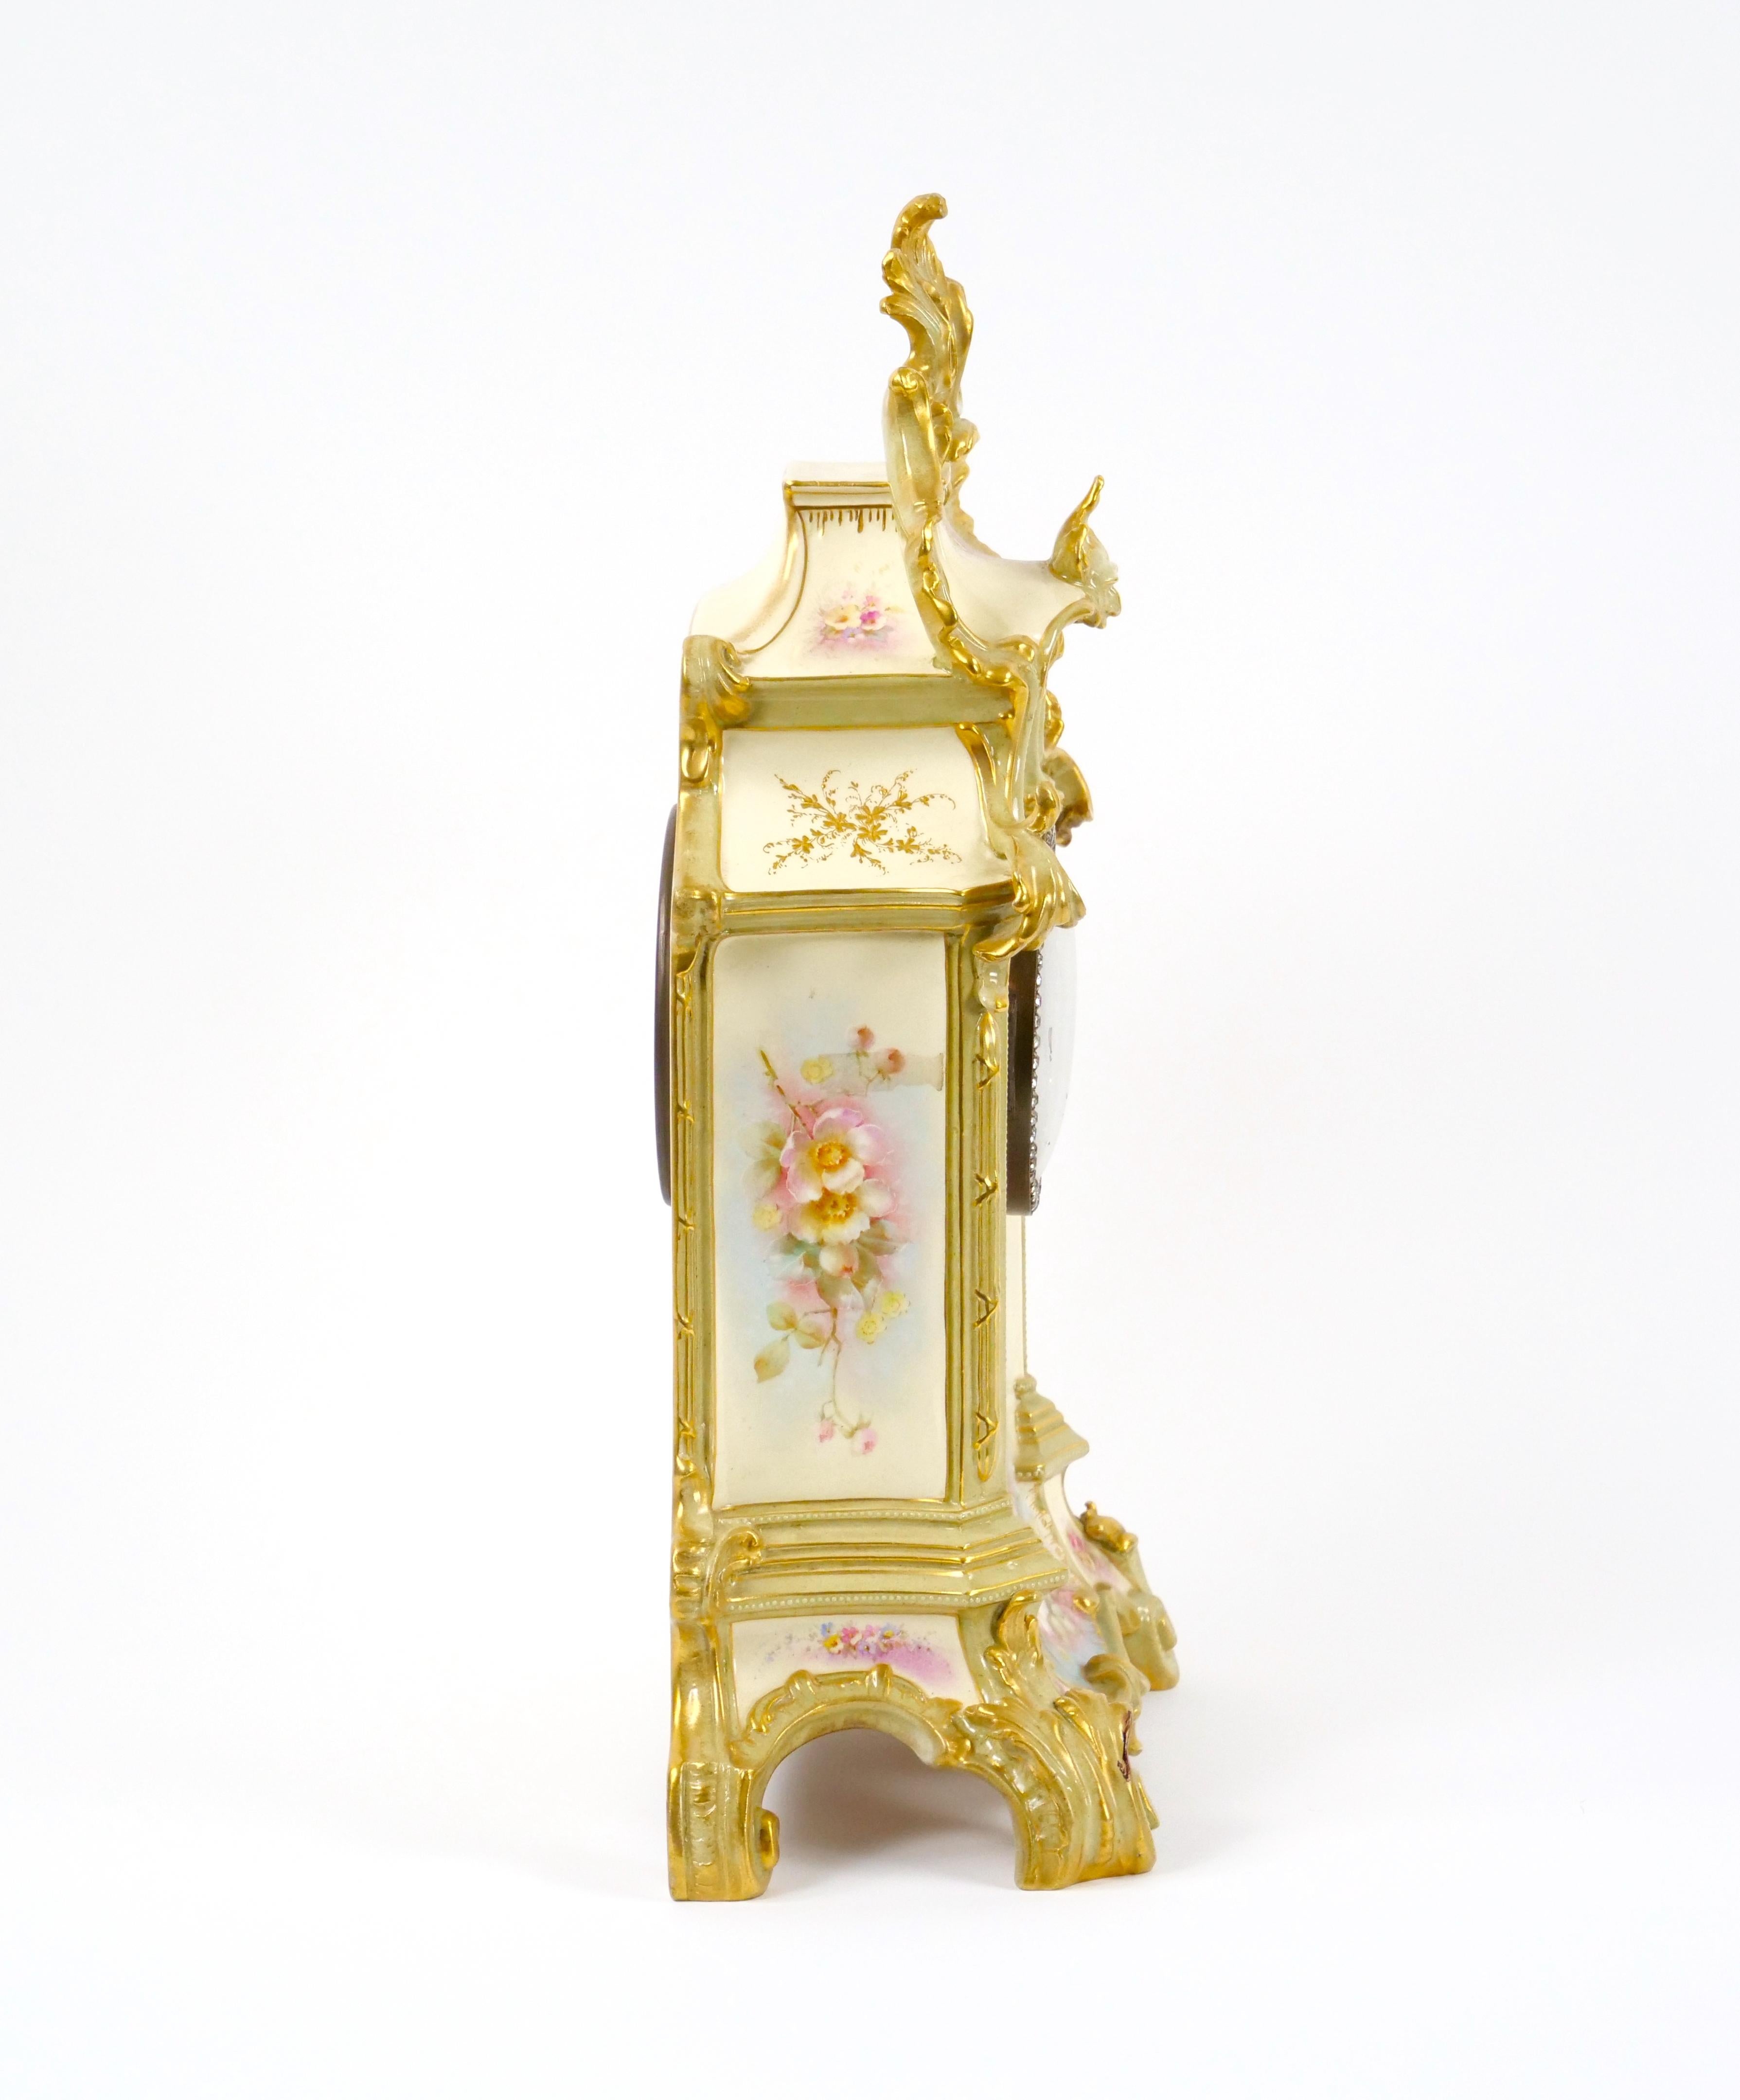 Louis XVI 19th Century French Hand Painted/Gilt Decorated Porcelain Mantel Clock